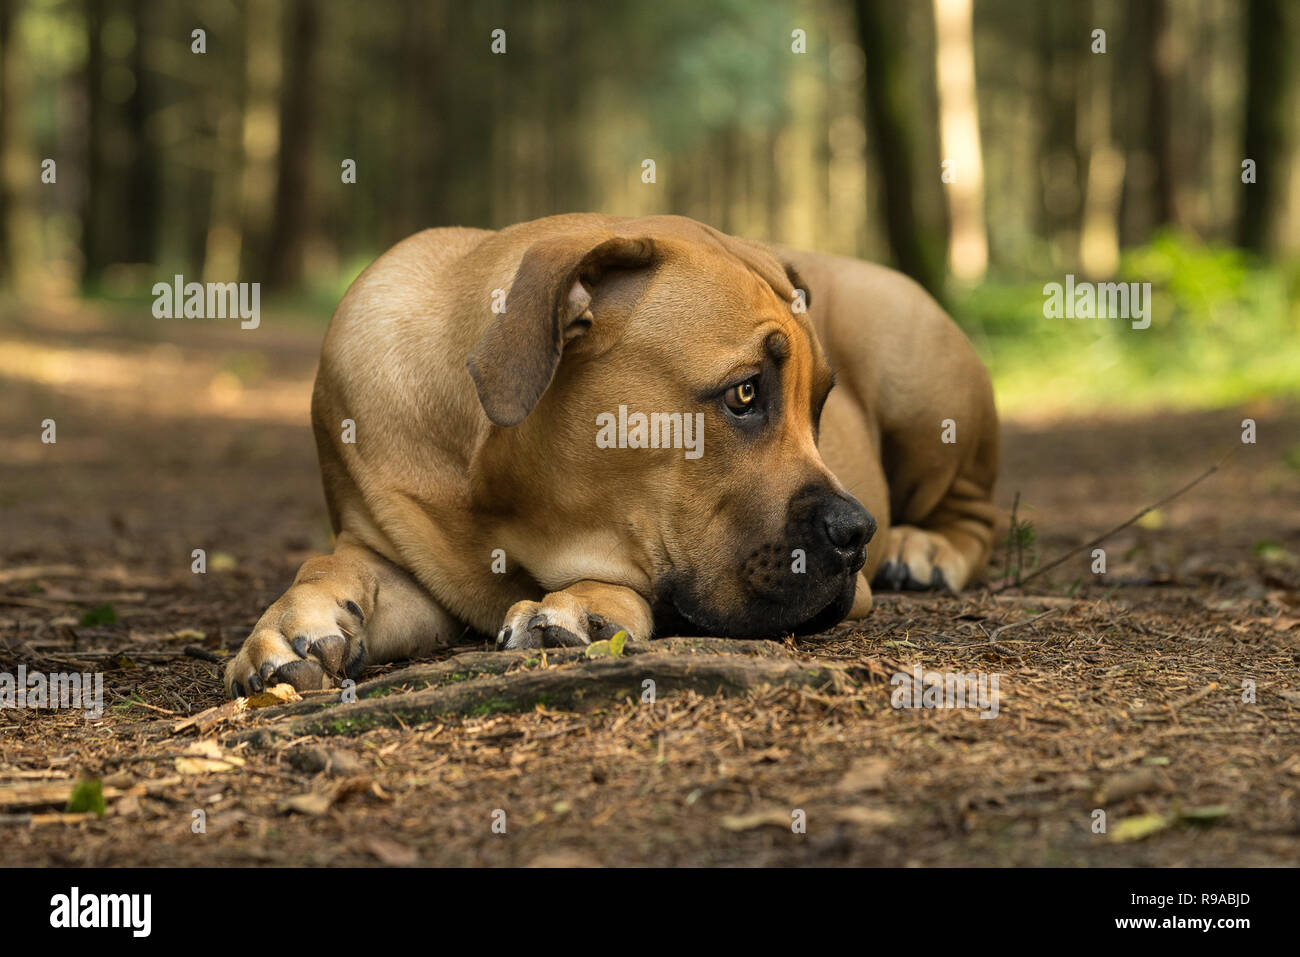 10 months young boerboel or South African Mastiff pup lying down with his head on the floor seen from the front facing right in a forrest setting Stock Photo